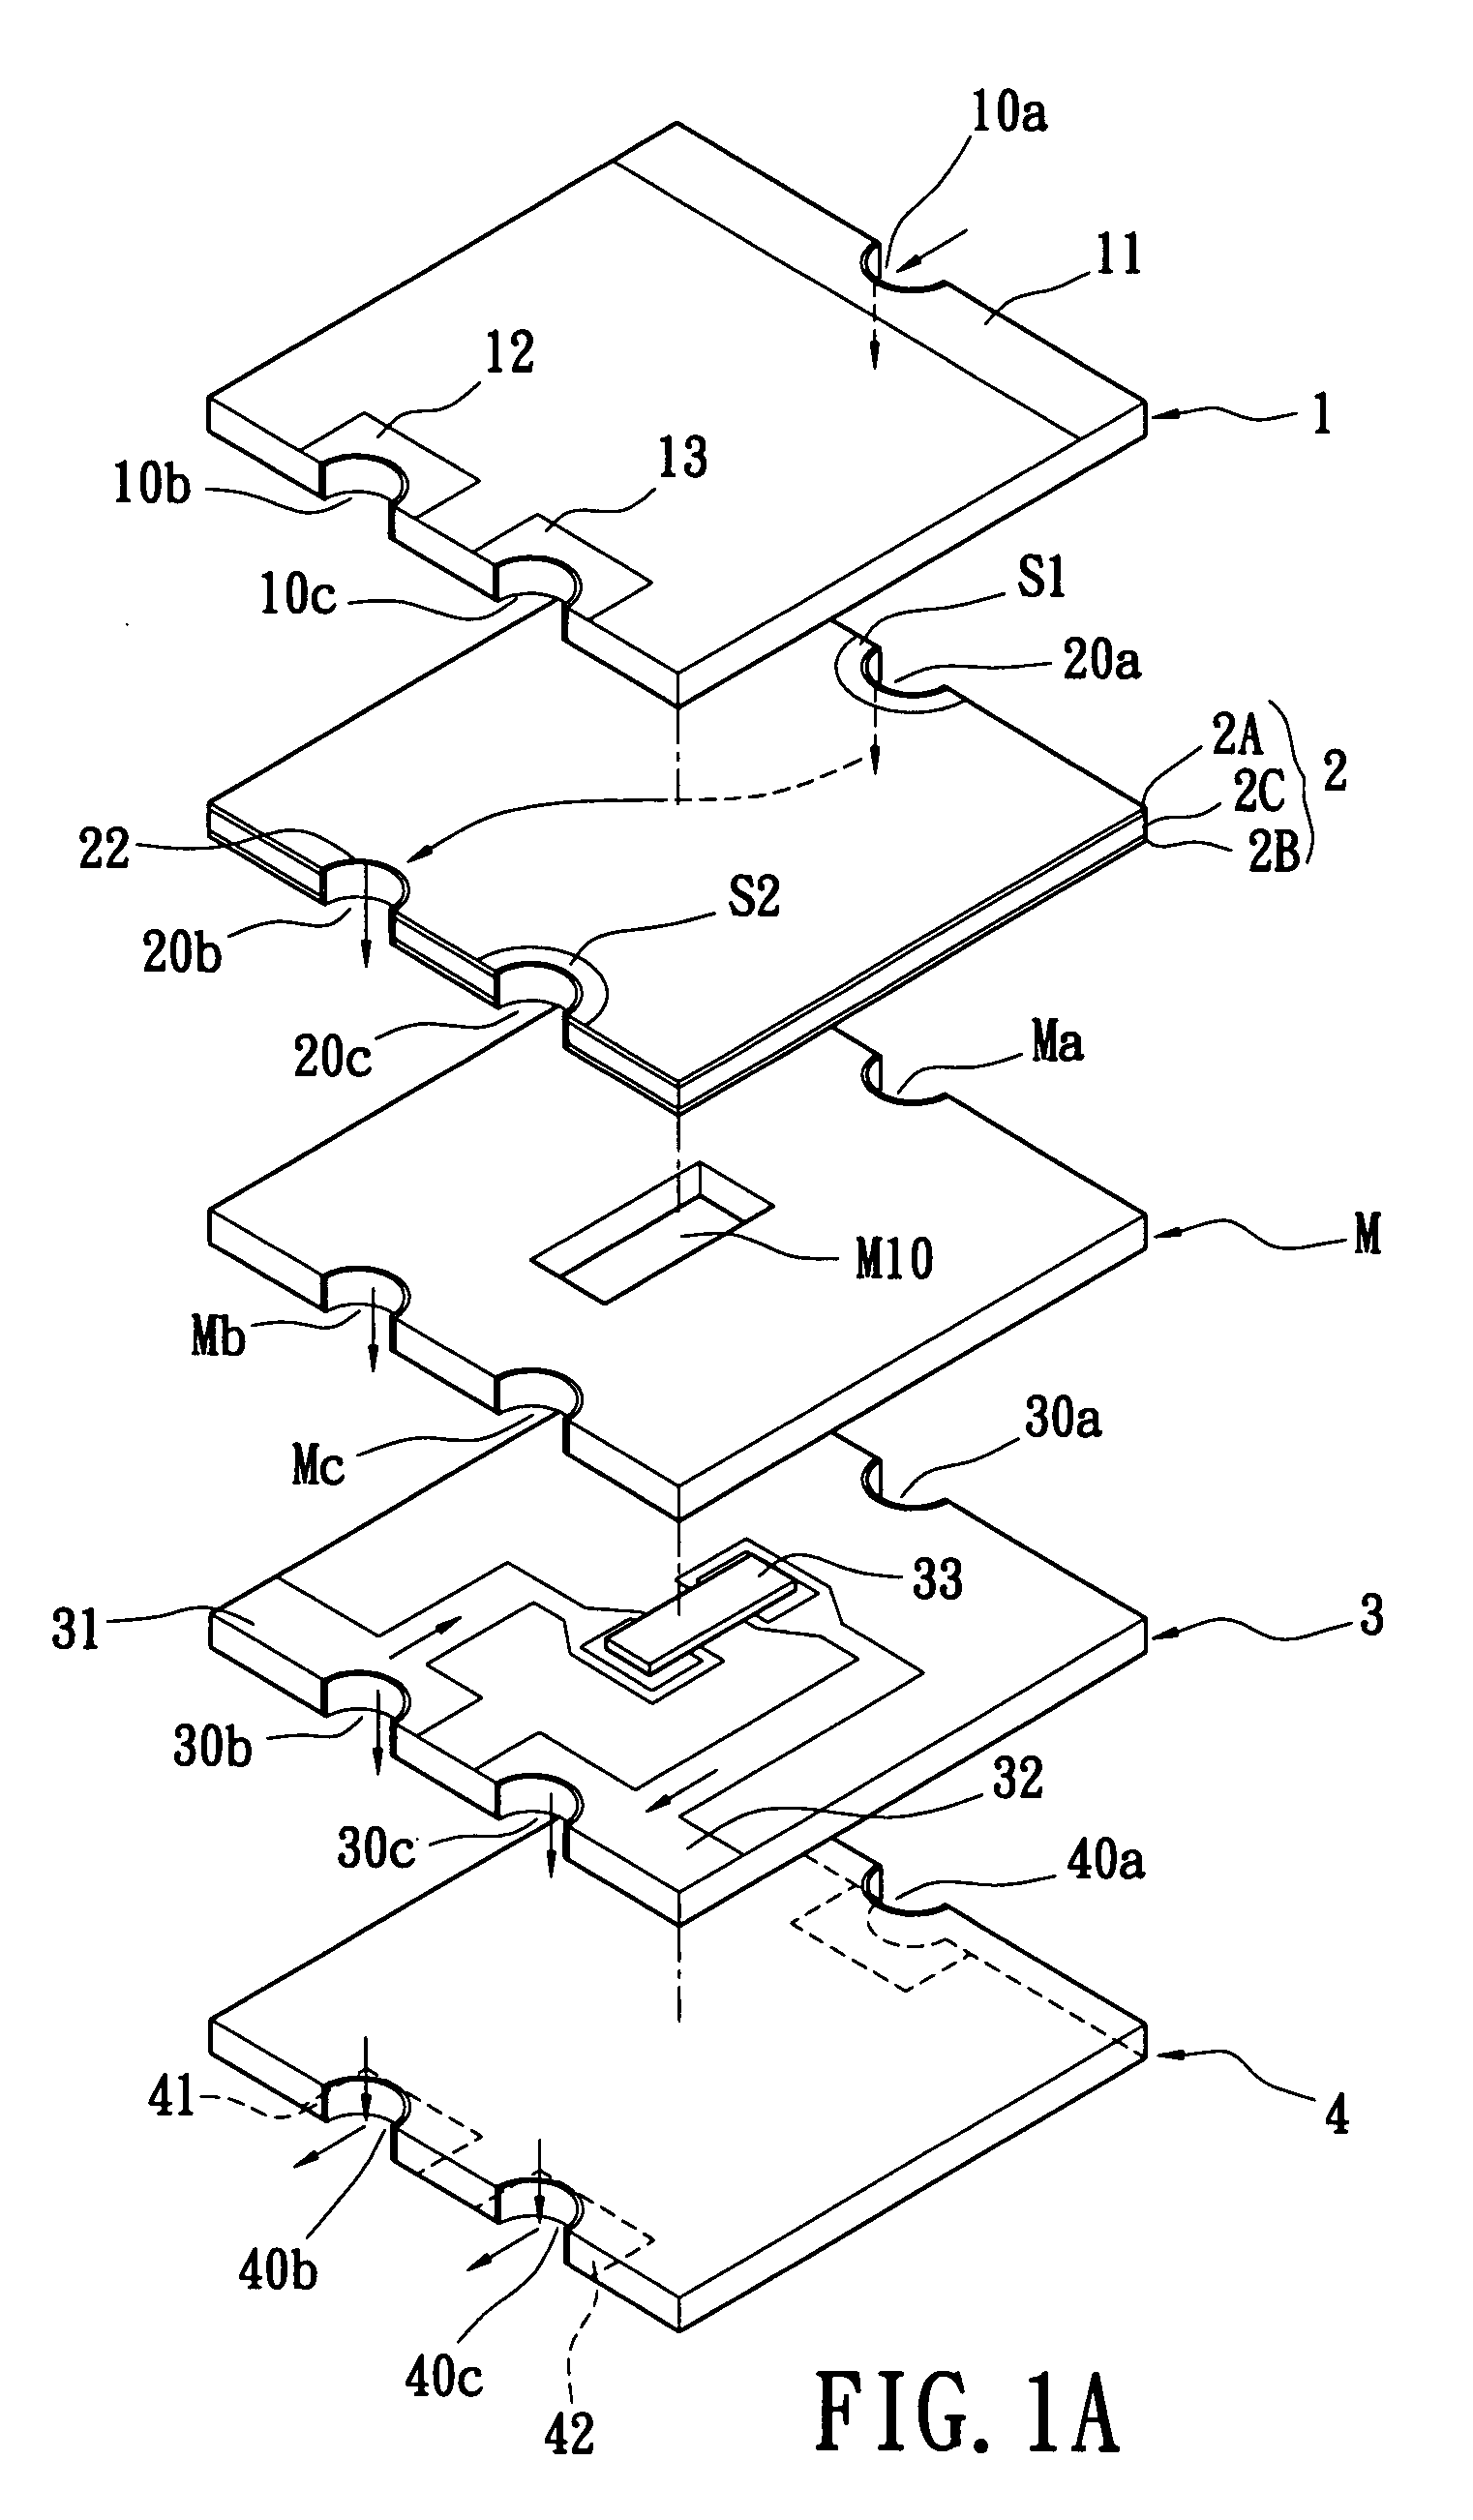 Embedded type multifunctional integrated structure and method for manufacturing the same